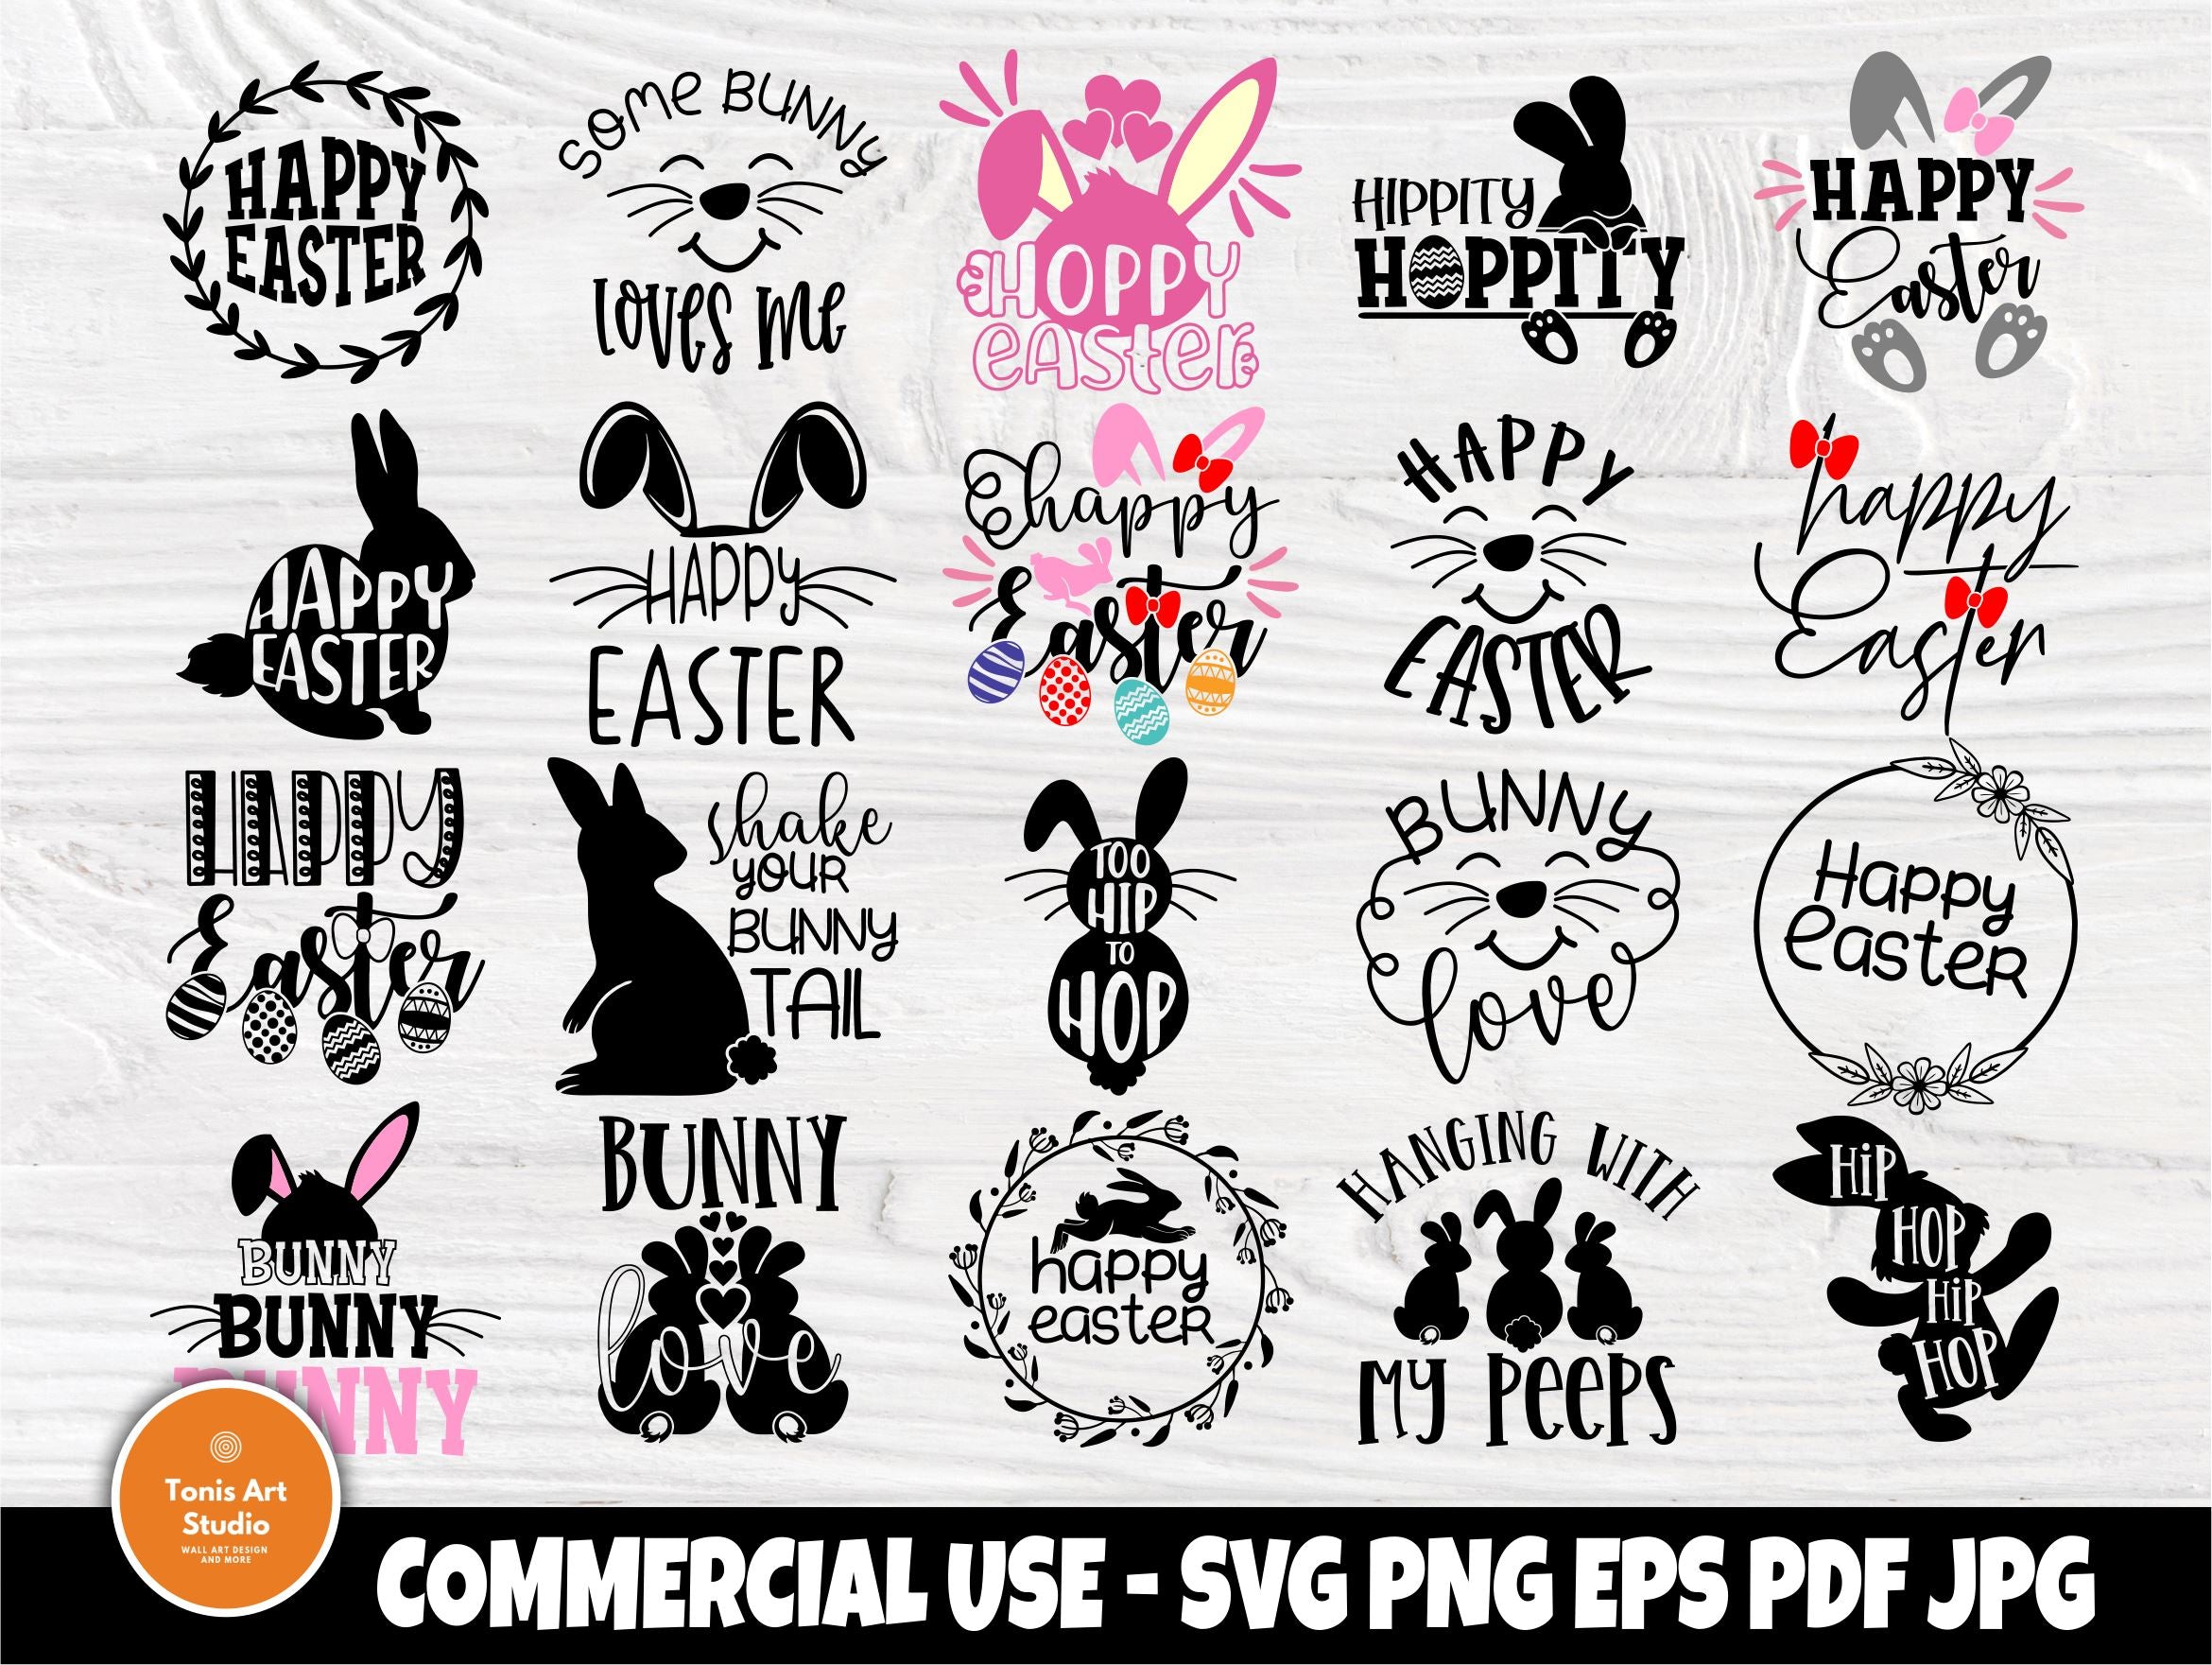 Cricut Easter Shirt Ideas for the Whole Family - Free SVG Files